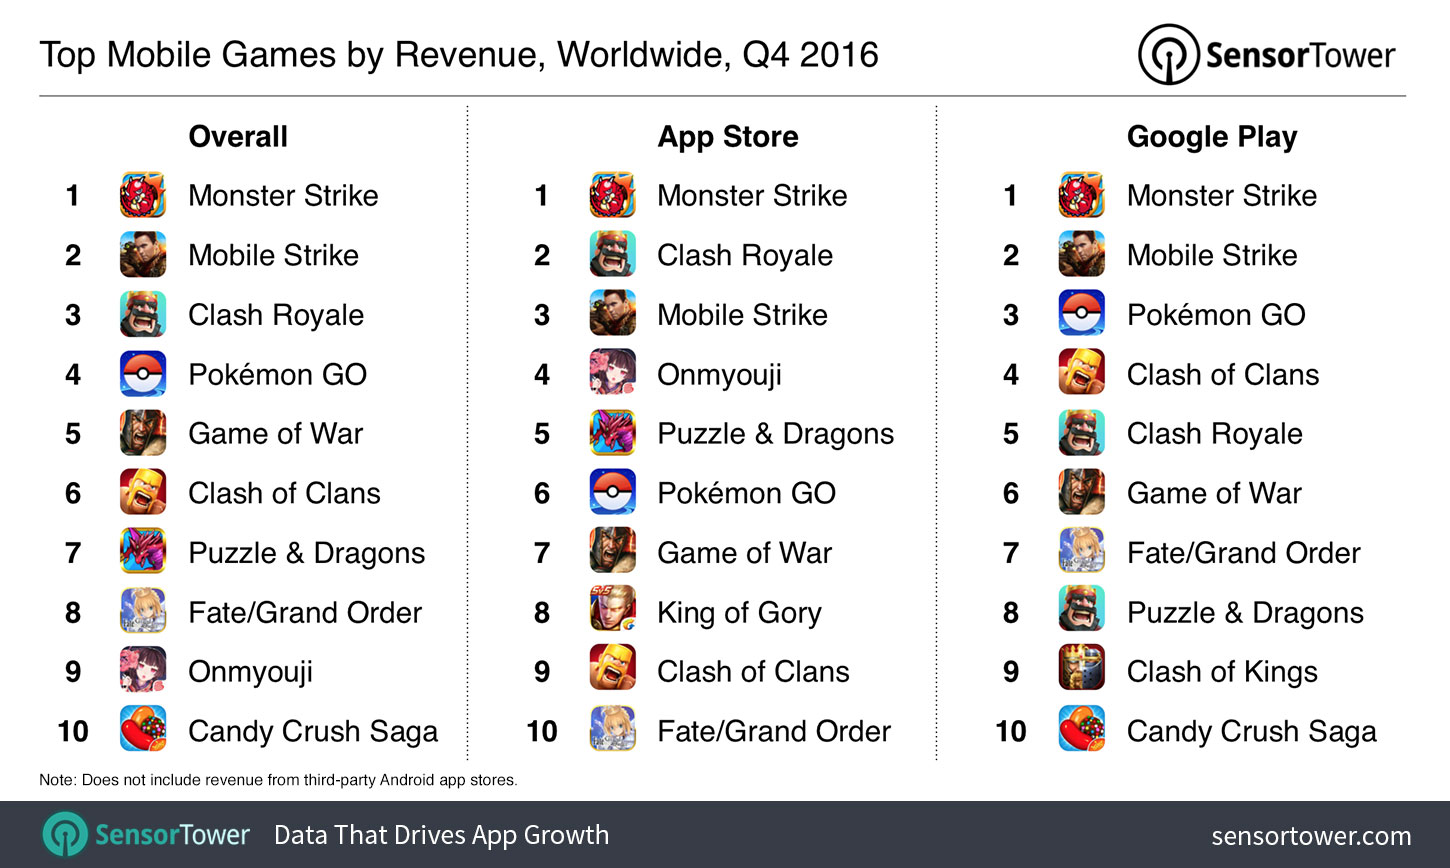 Q4 2016's Top Mobile Games by Revenue